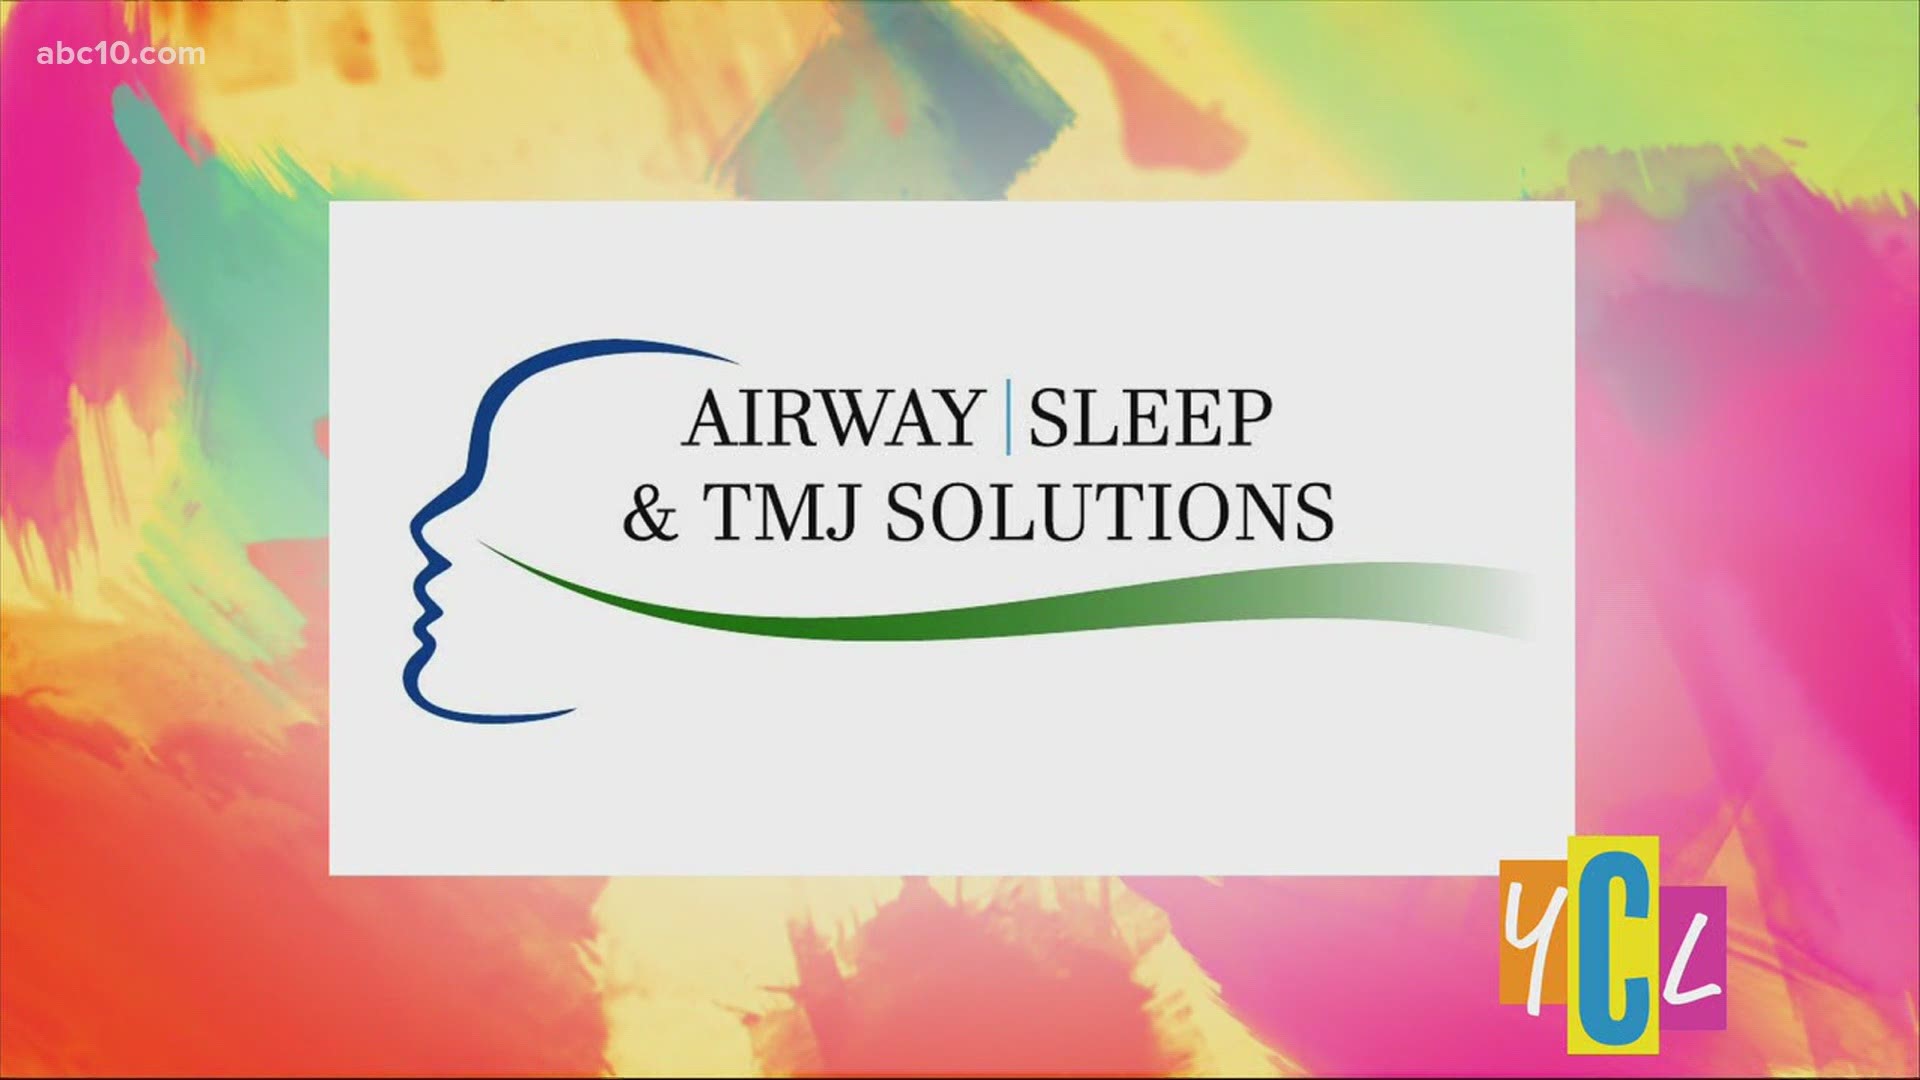 Alternative solution center for treating airway and sleeping disorders. This segment paid for by Airway Sleep & TMJ Solutions.